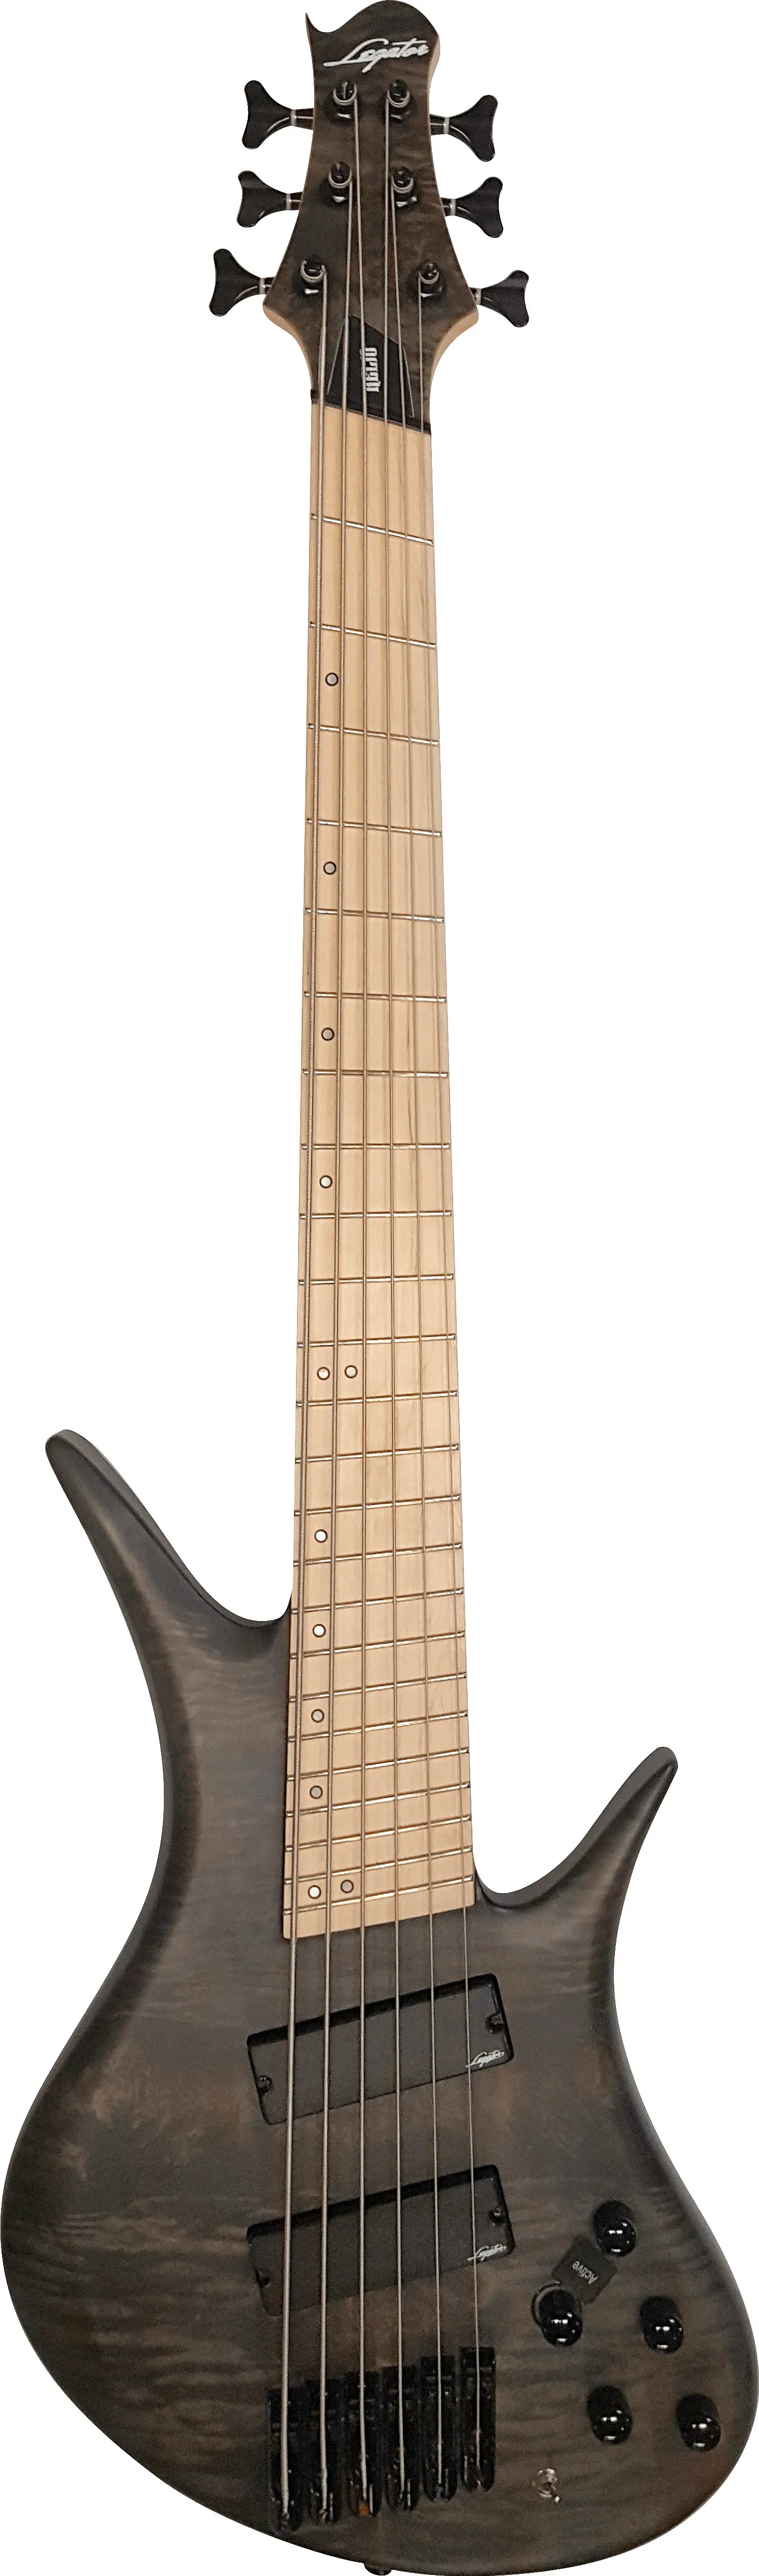 2018 Helio Multi Scale Bass 300-PRO X Series 6-String by Legator Guitars